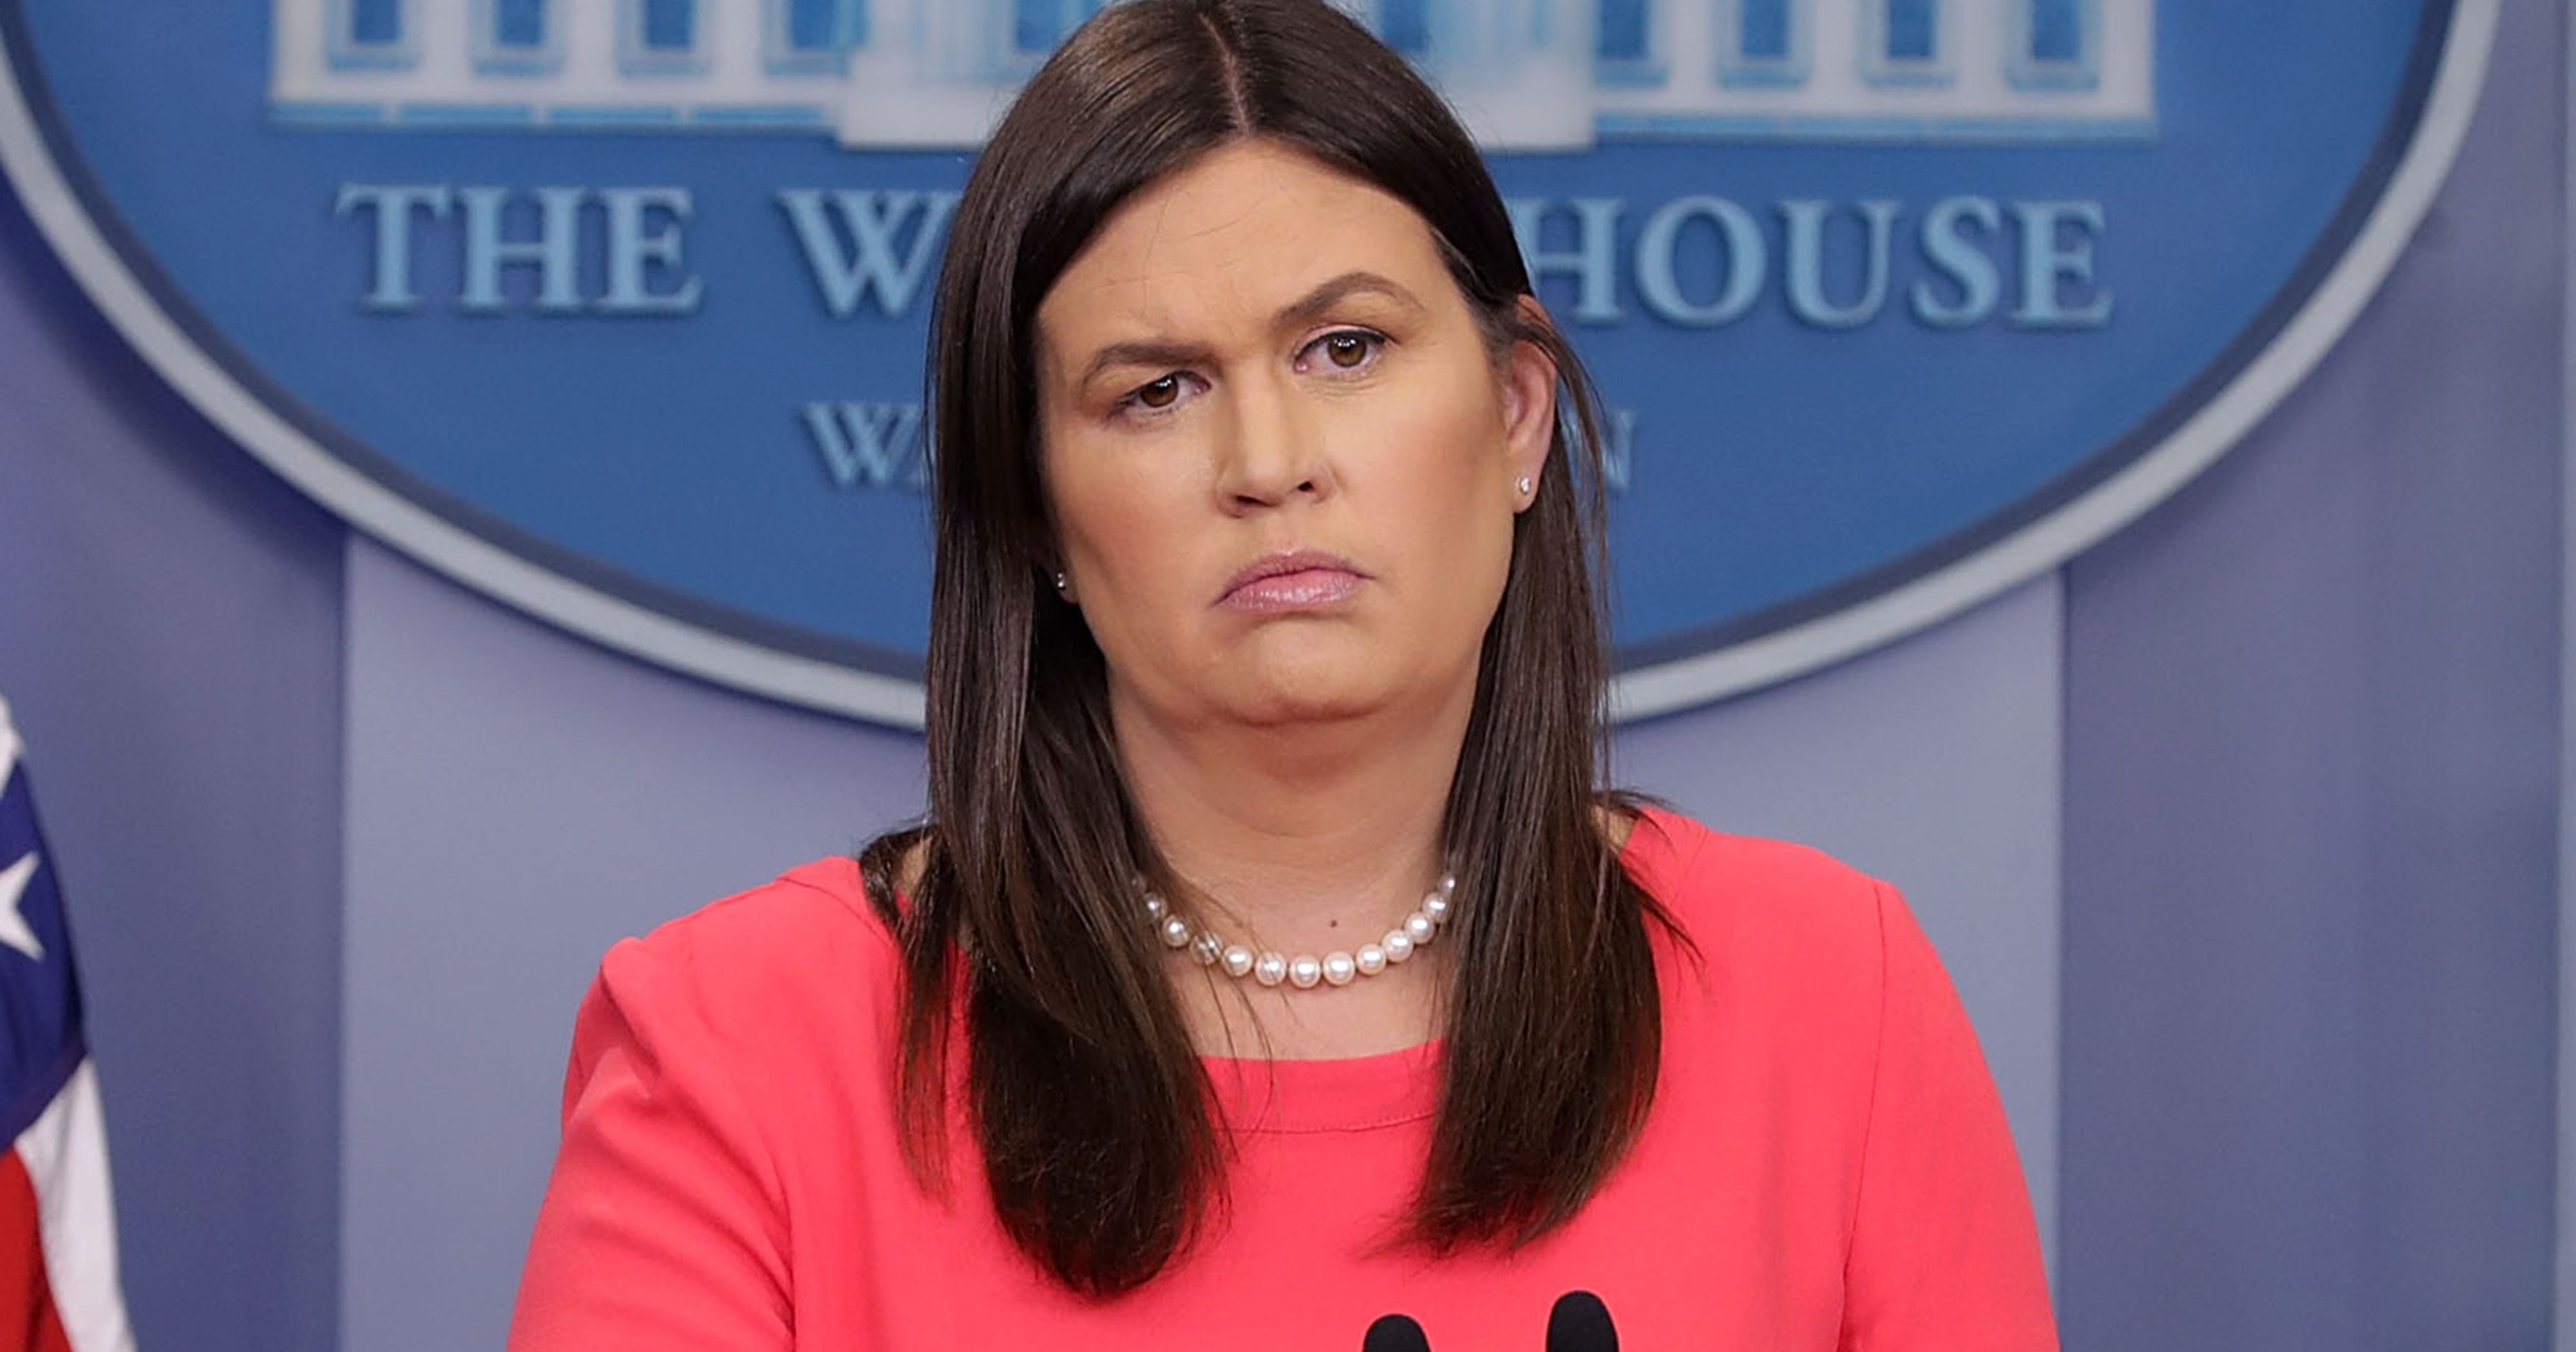 The War Between The White House And The New York Times Escalates With One Sarah Sanders’ Tweet